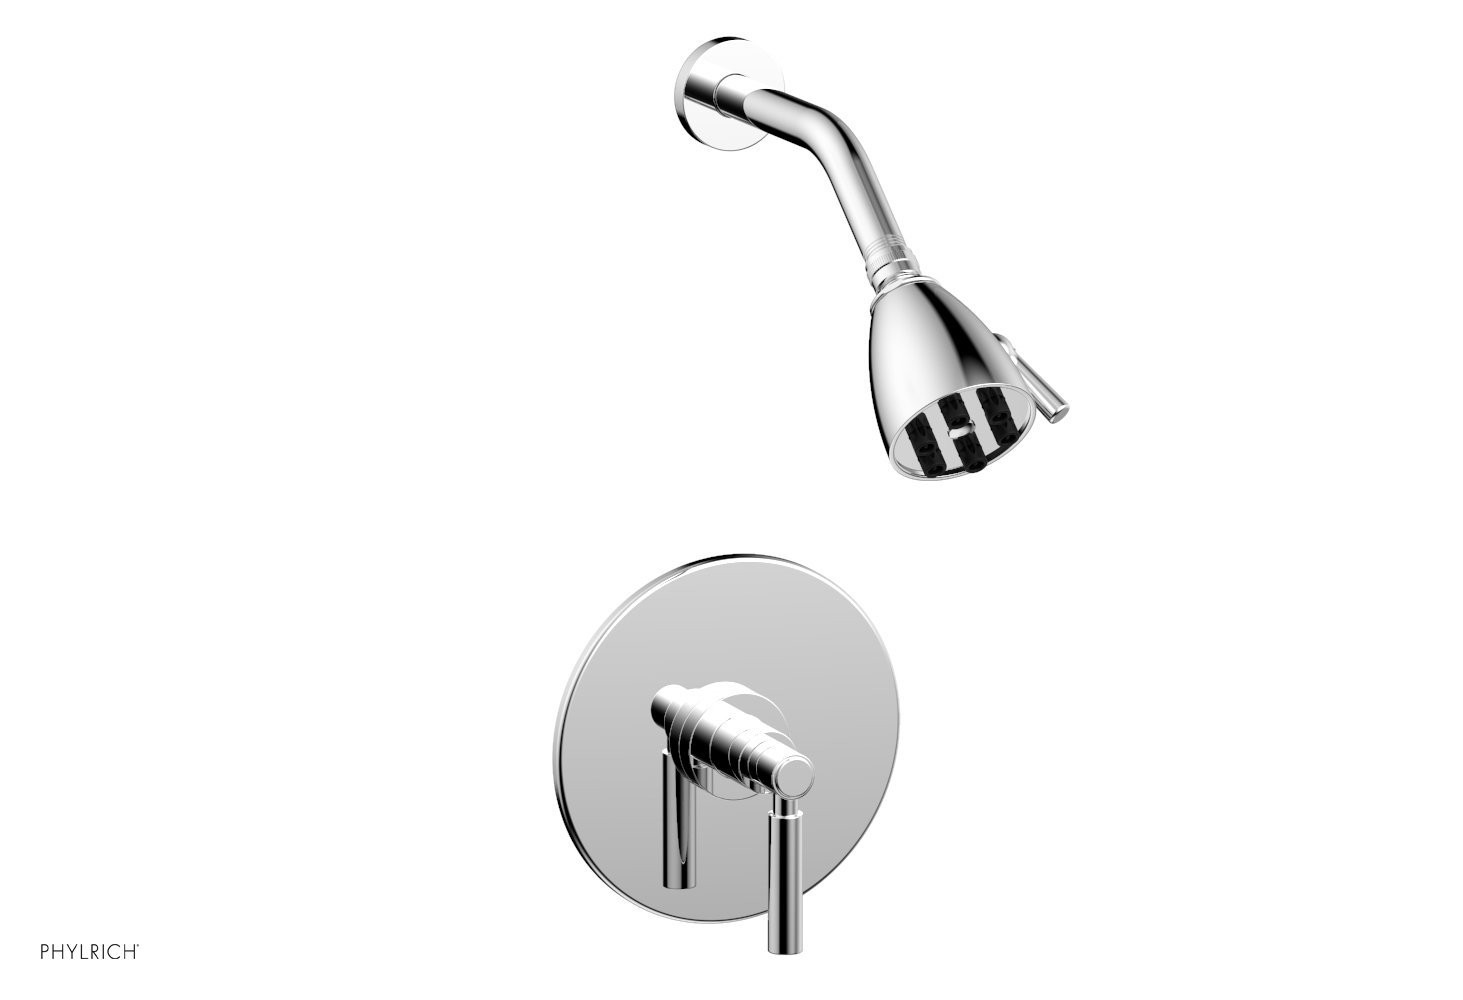 PHYLRICH DPB3130 BASIC WALL MOUNT PRESSURE BALANCE SHOWER SET WITH LEVER HANDLE